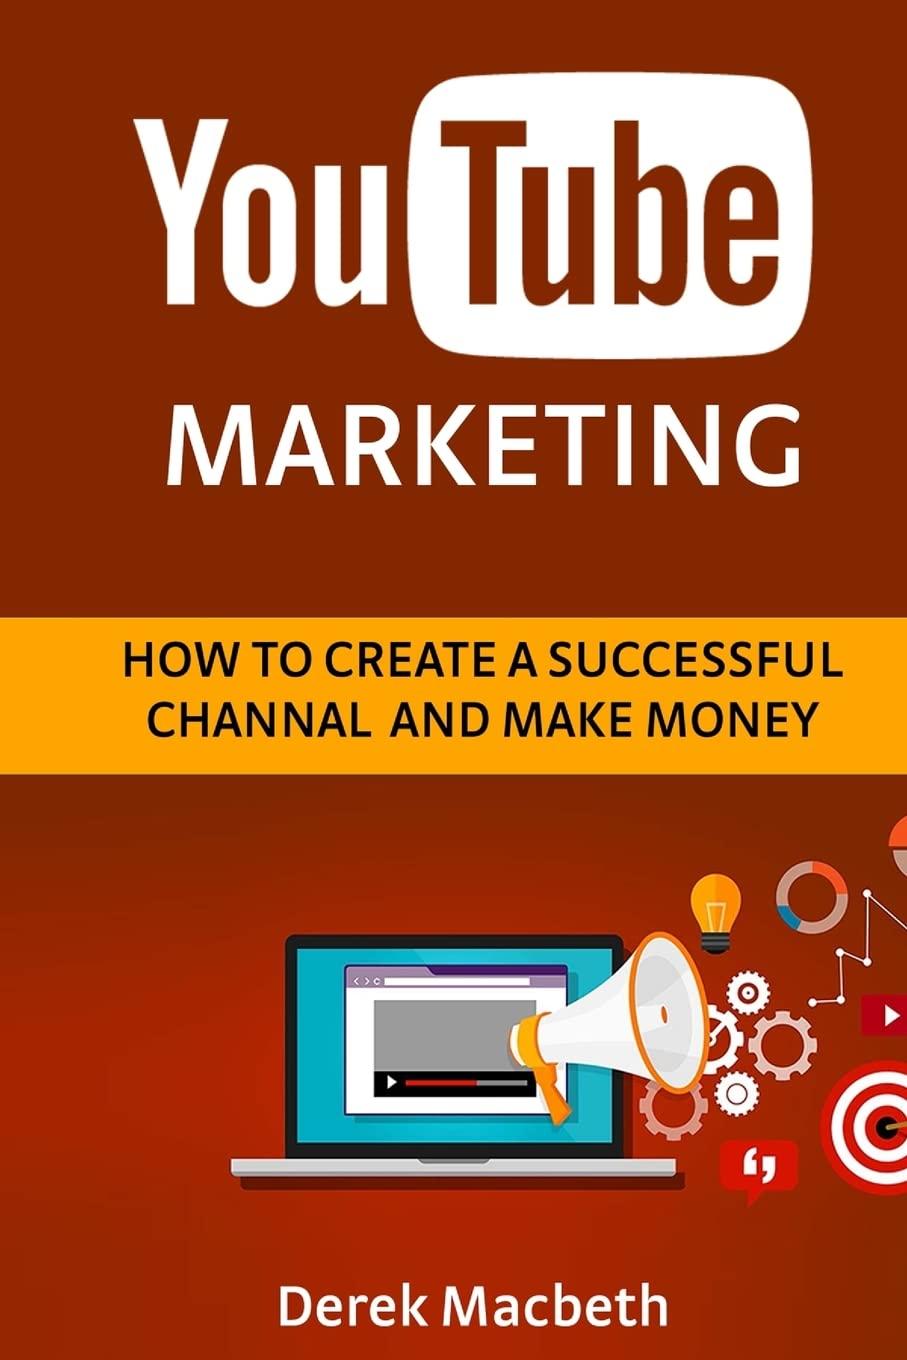 Youtube Marketing How To Create A Successful Channel And Make Money